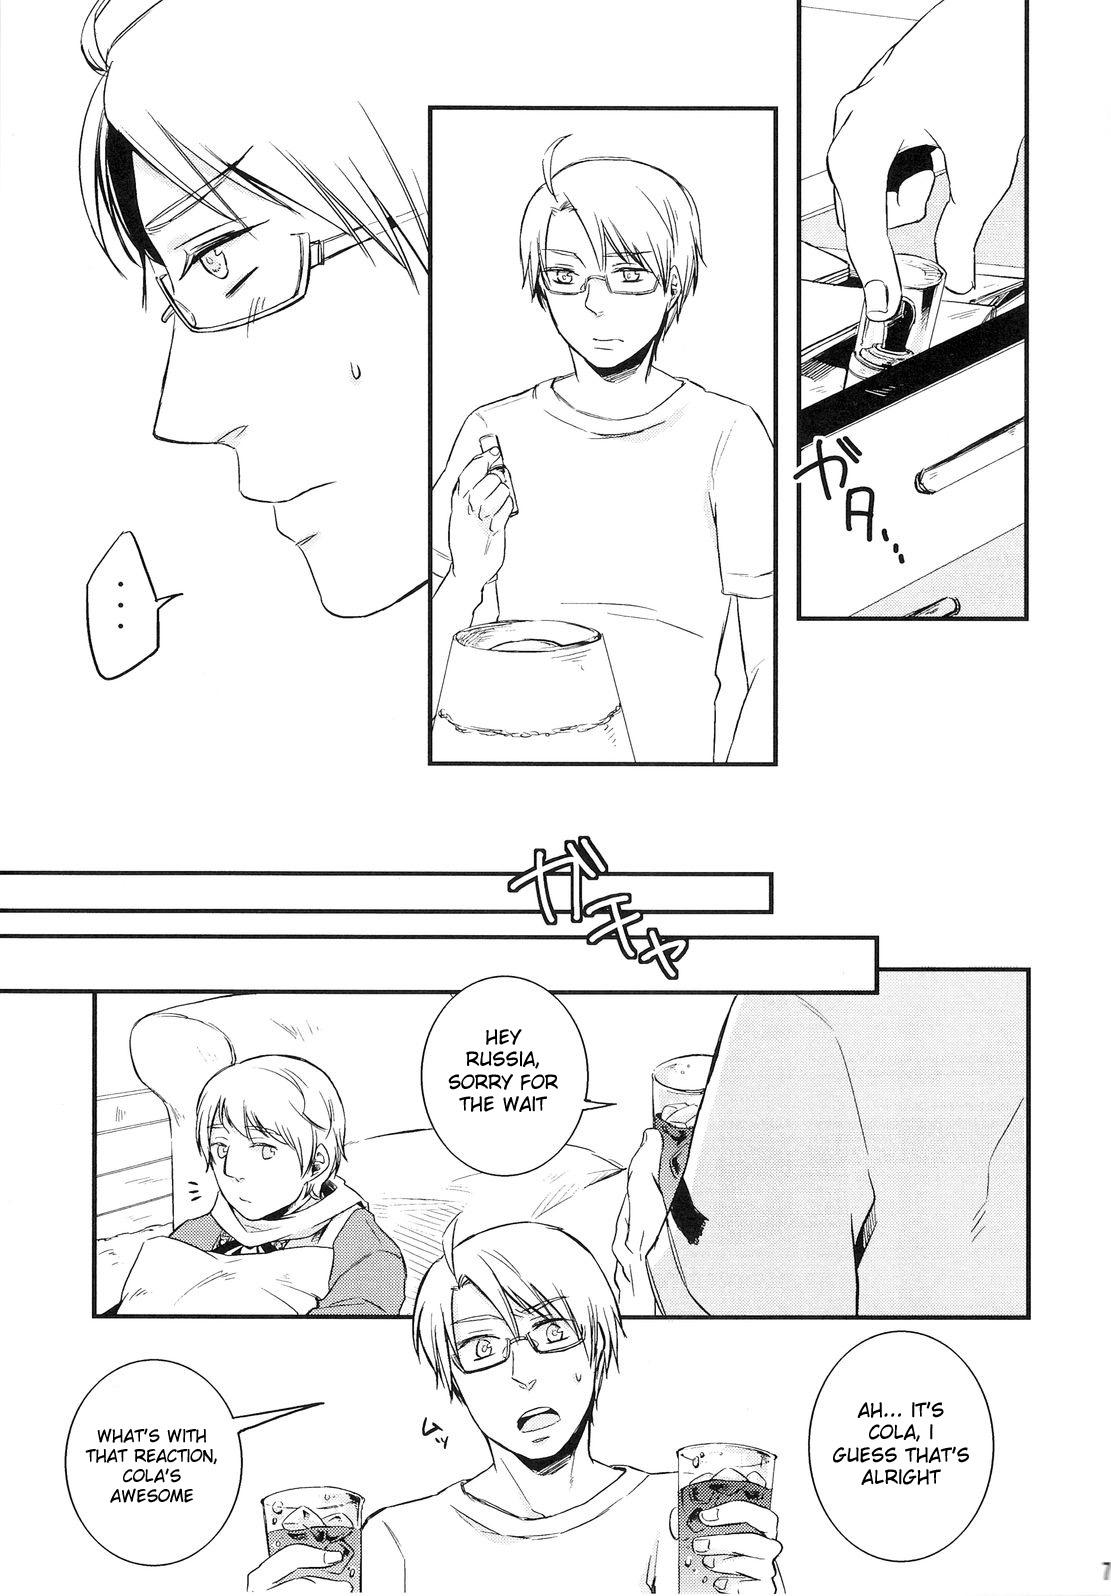 Thick NO PROBLEM - Axis powers hetalia Periscope - Page 6